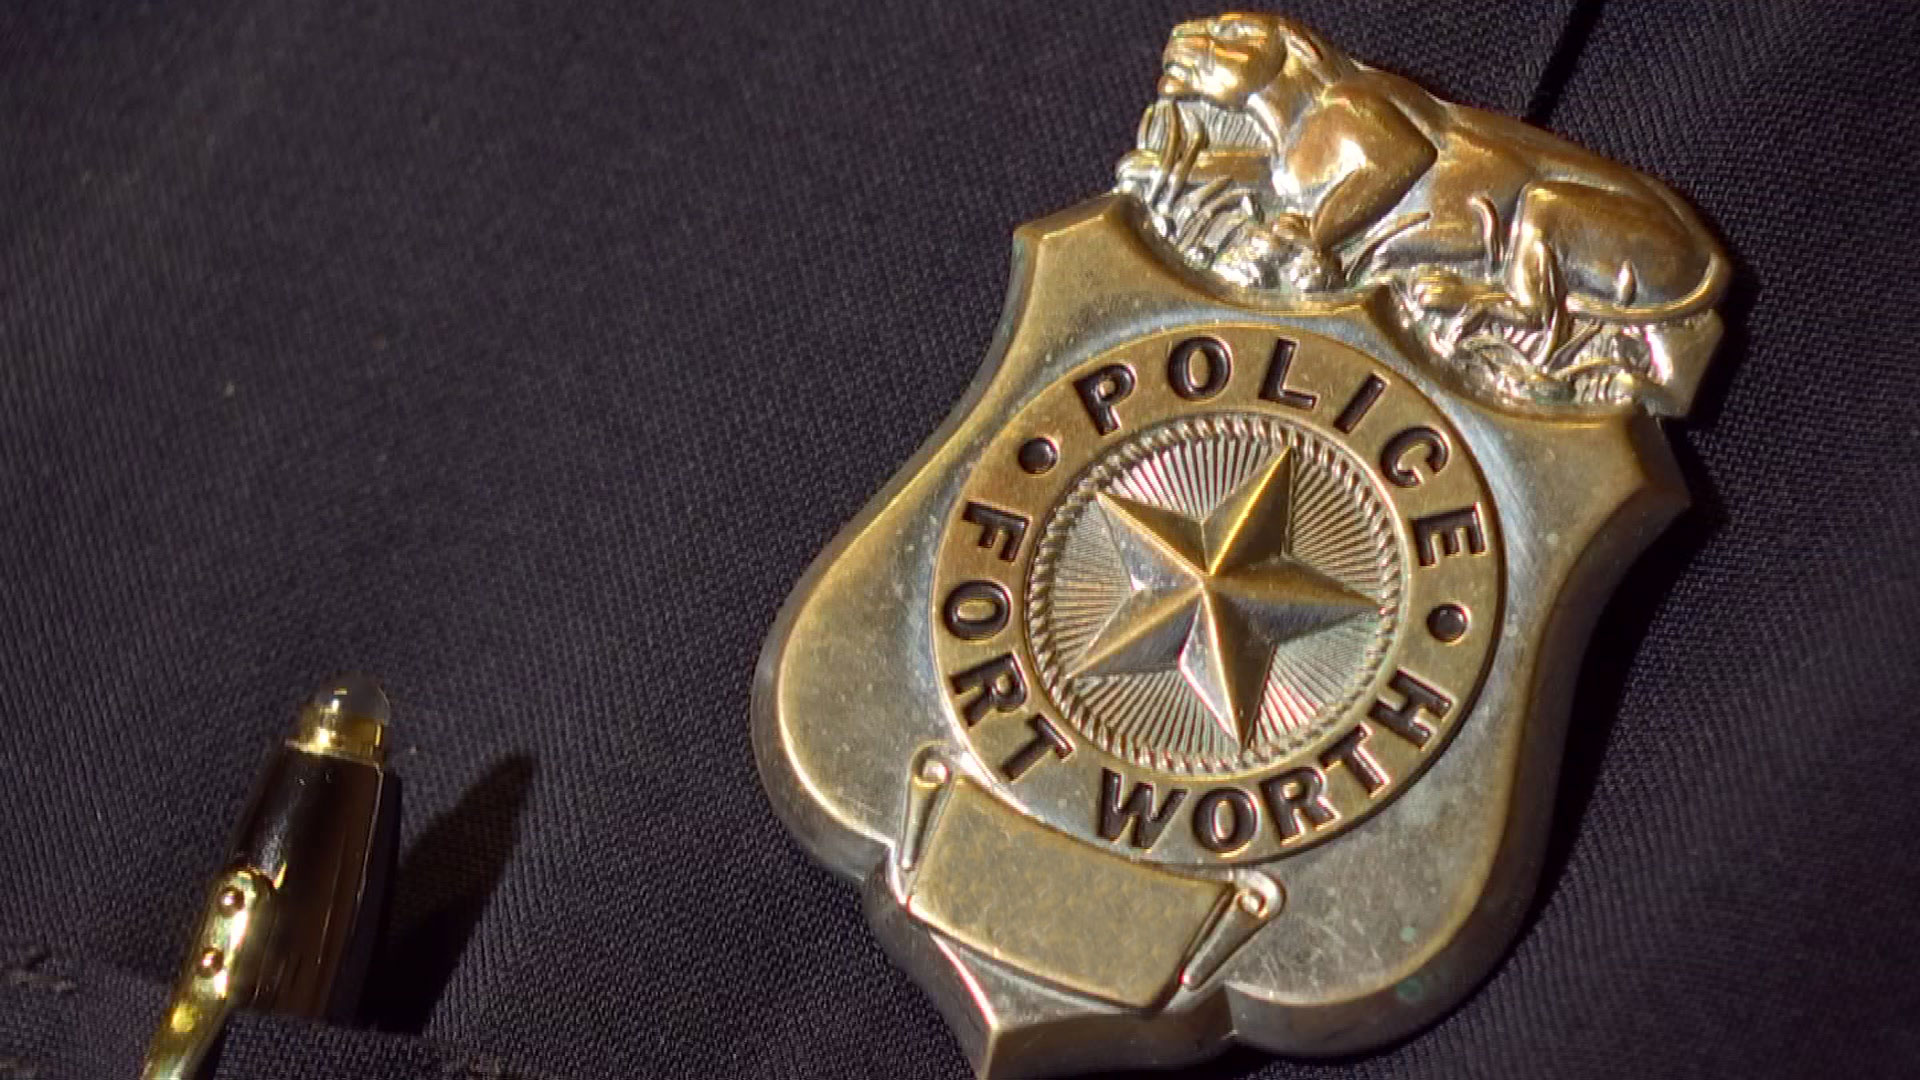 Fort Worth Police Officer Accused of Domestic Violence in Colorado – NBC 5 Dallas-Fort Worth